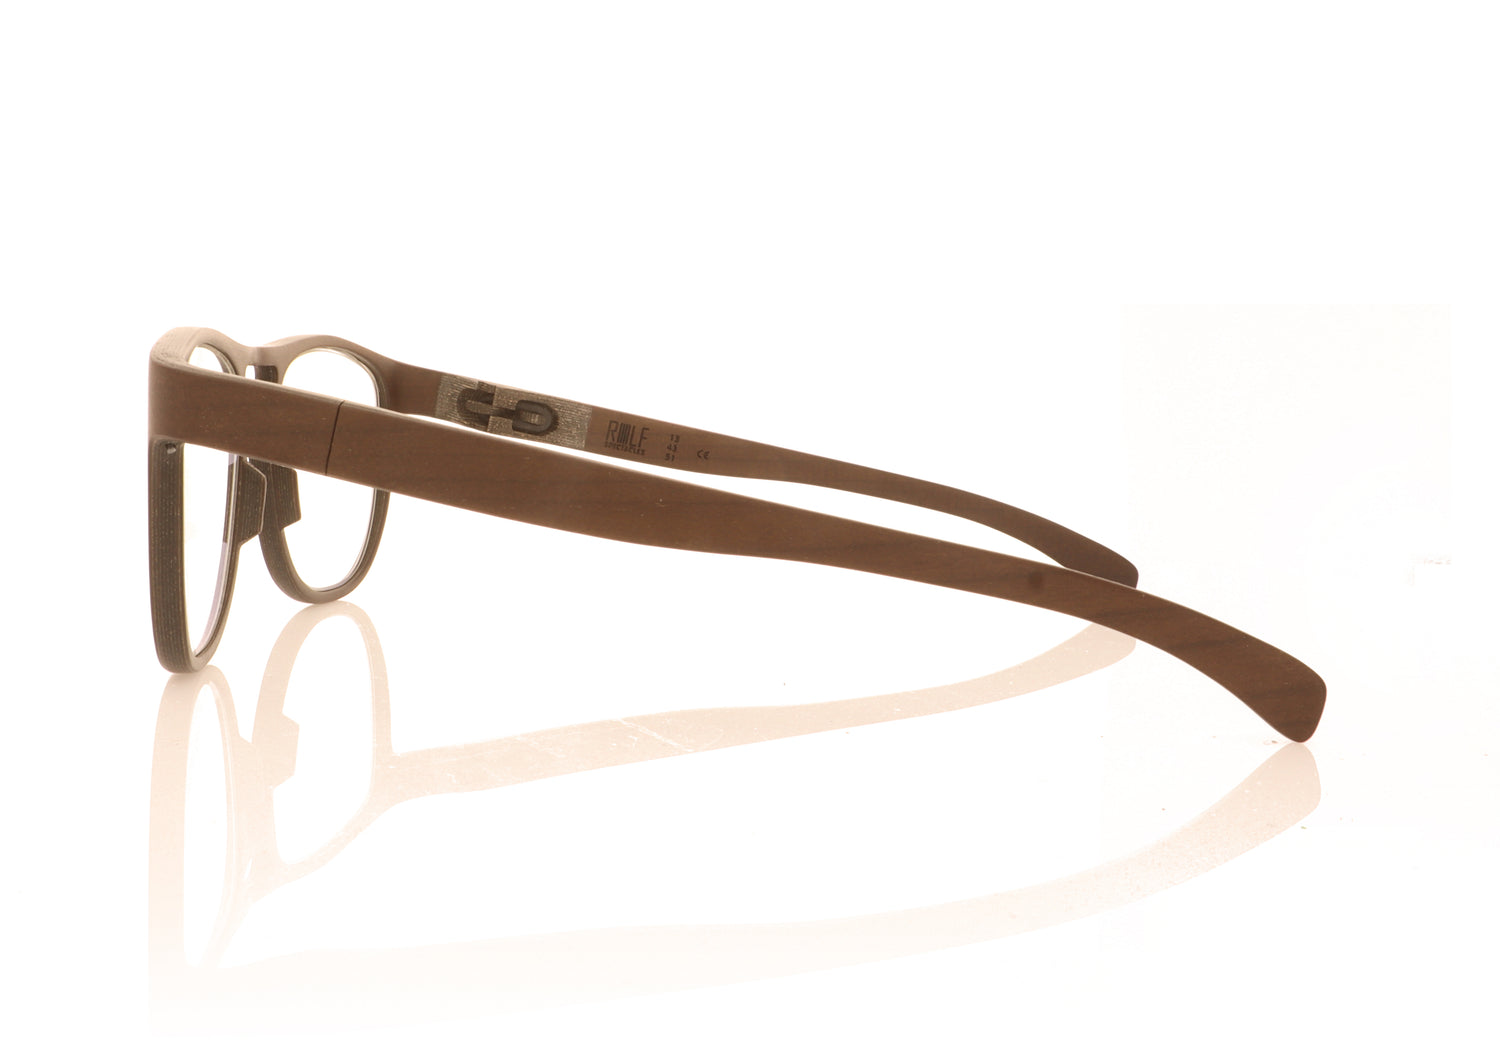 ROLF Spectacles Veloce 96 Brown Glasses - Side